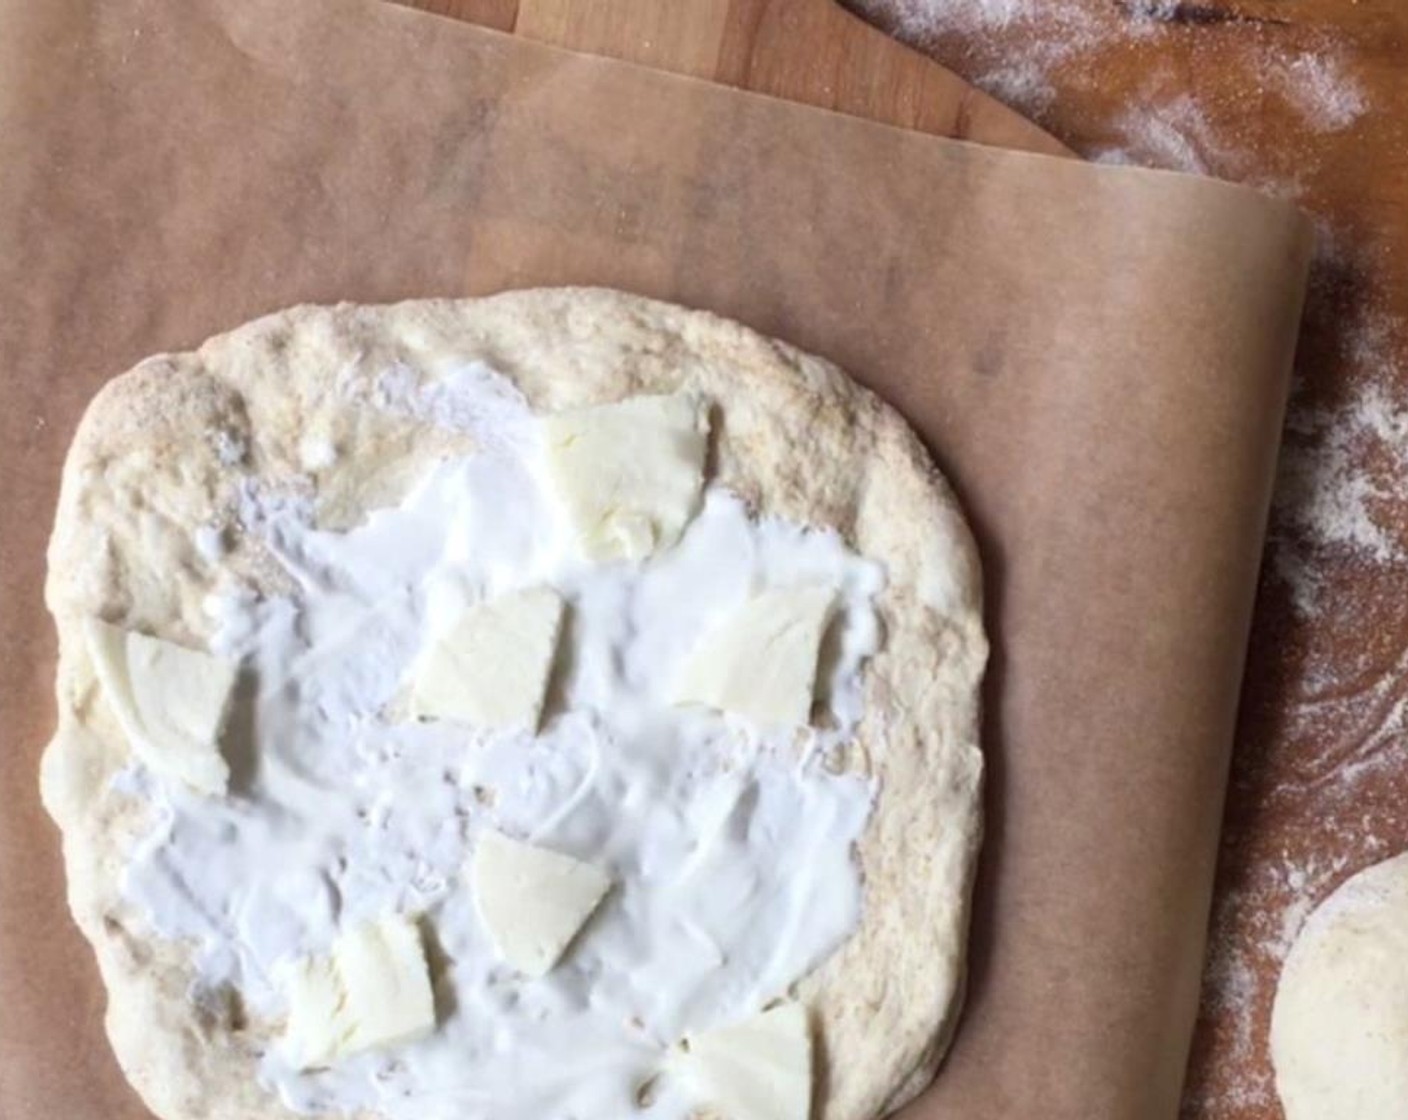 step 7 When you are ready to bake, gently stretch one round into a 10 to 11 inch circle. Transfer to a parchment paper-lined pizza peel. Spread a few tablespoons of Crème Fraîche (to taste) over the surface of the dough. Scatter Fresh Mozzarella Cheese Ball (to taste) over top.